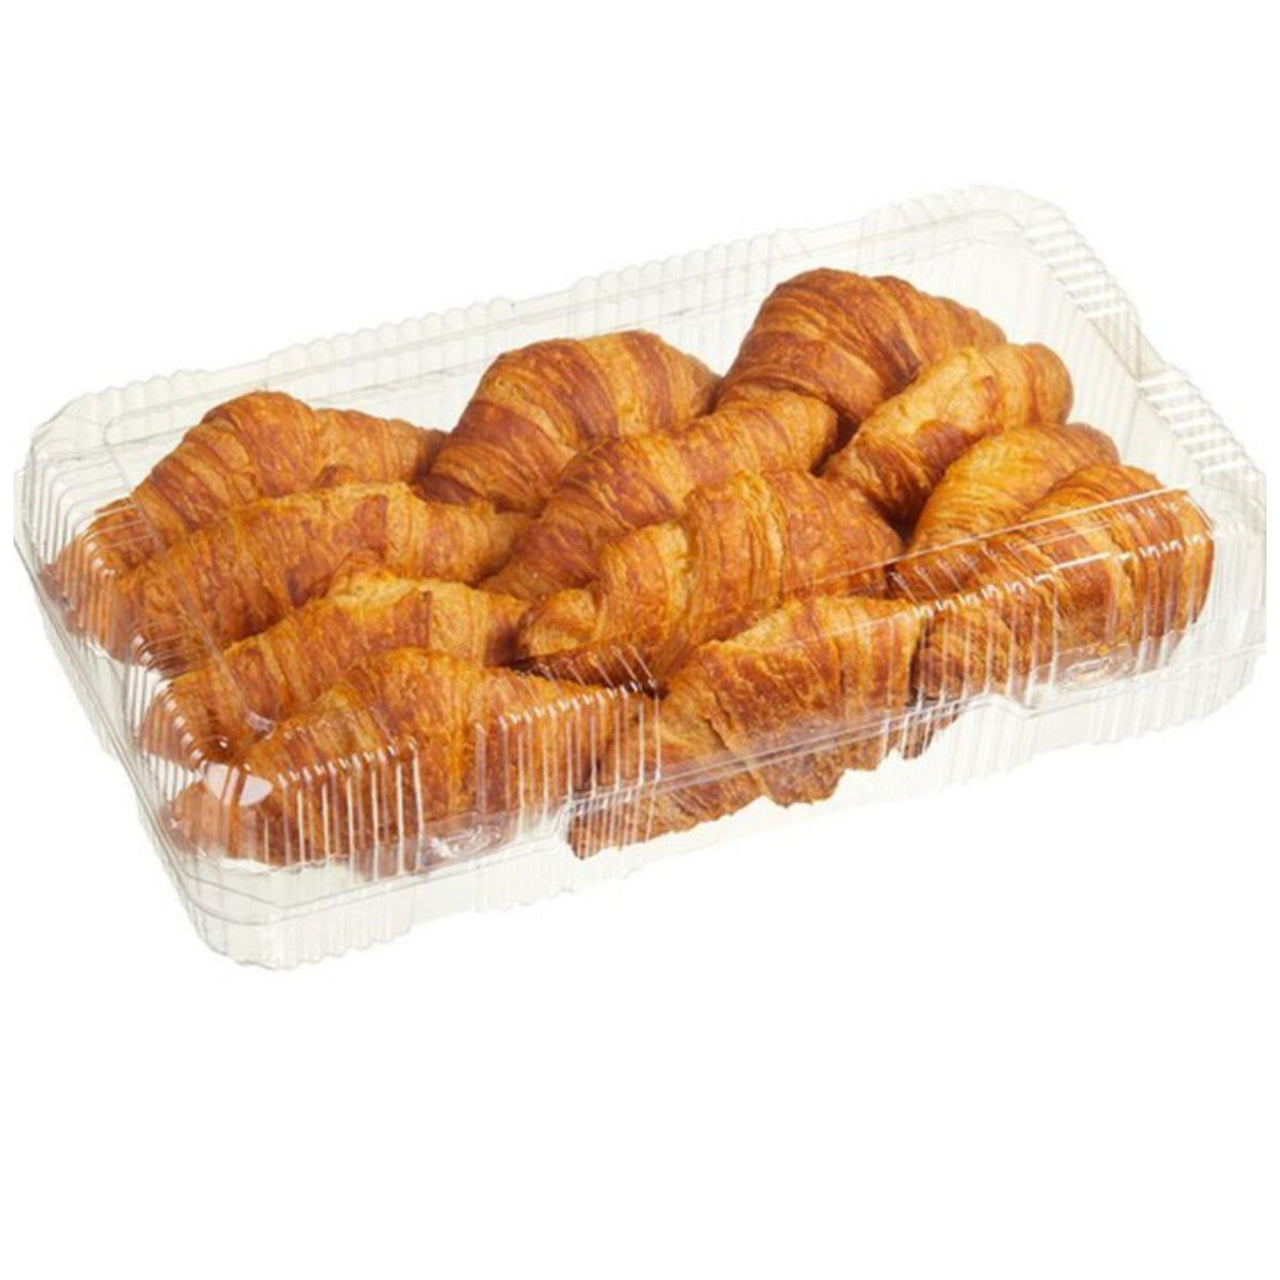 Image of Bakery All Butter Croissants